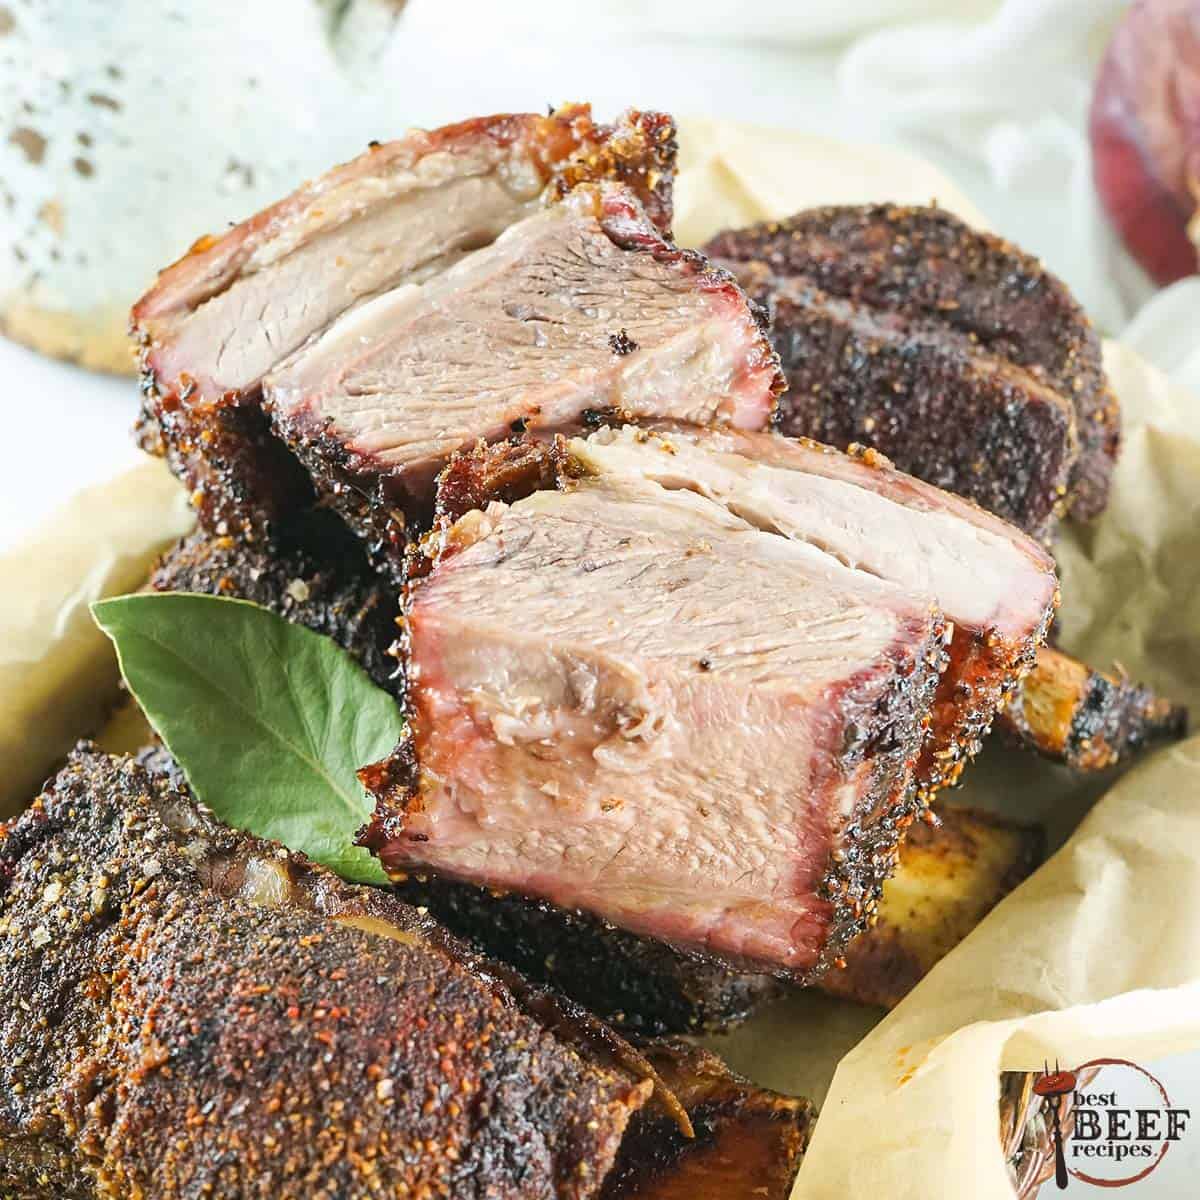 Smoked short ribs seasoned with dry rub for ribs in a basket